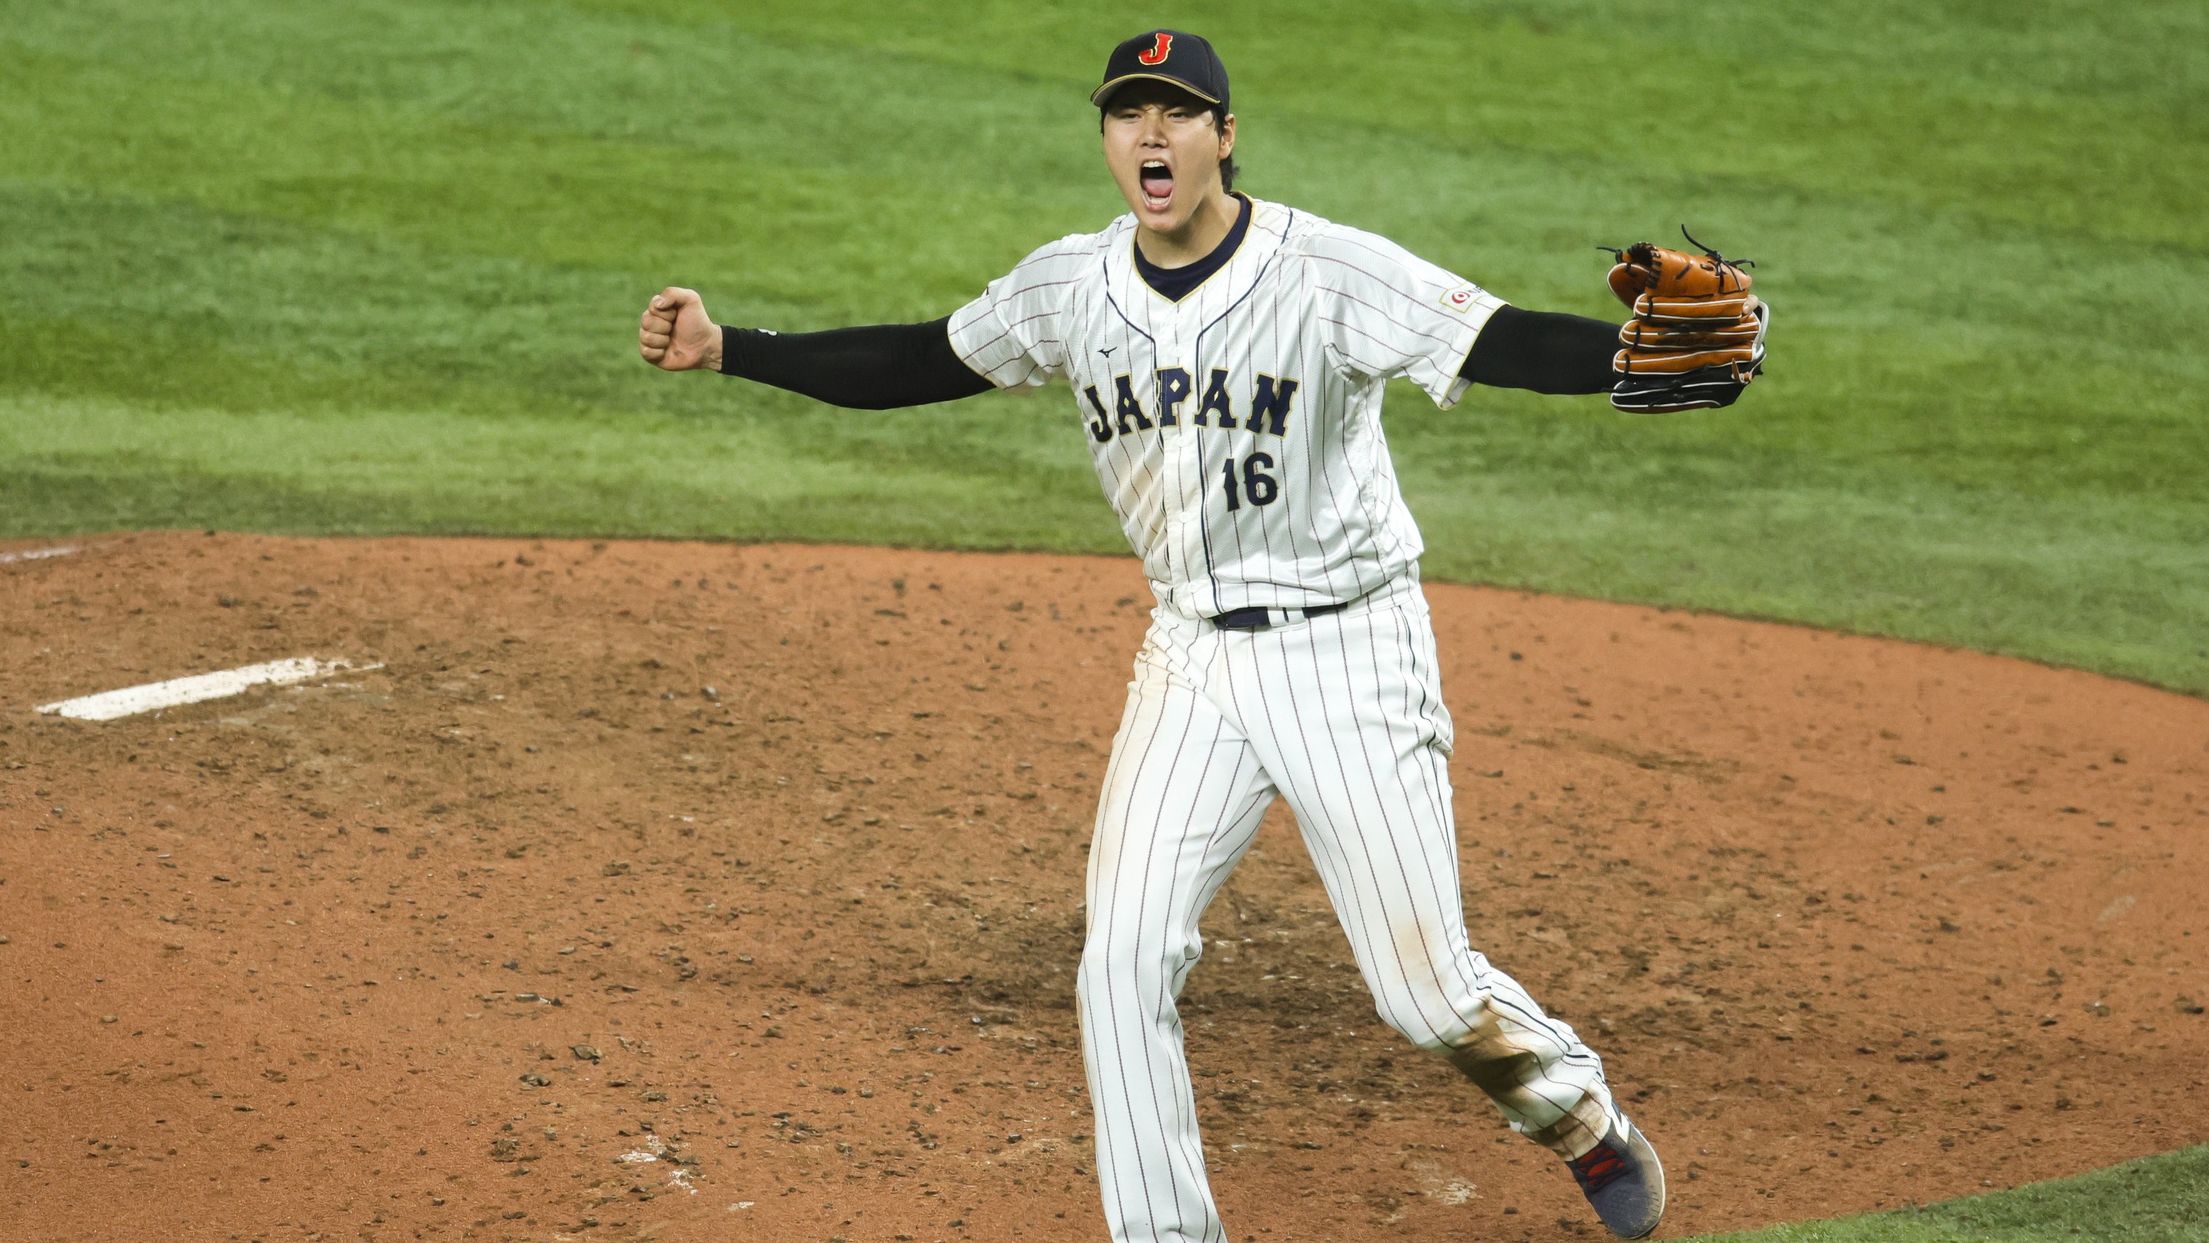 This Stat Makes Shohei Ohtani's WBC Strikeout of Mike Trout Even